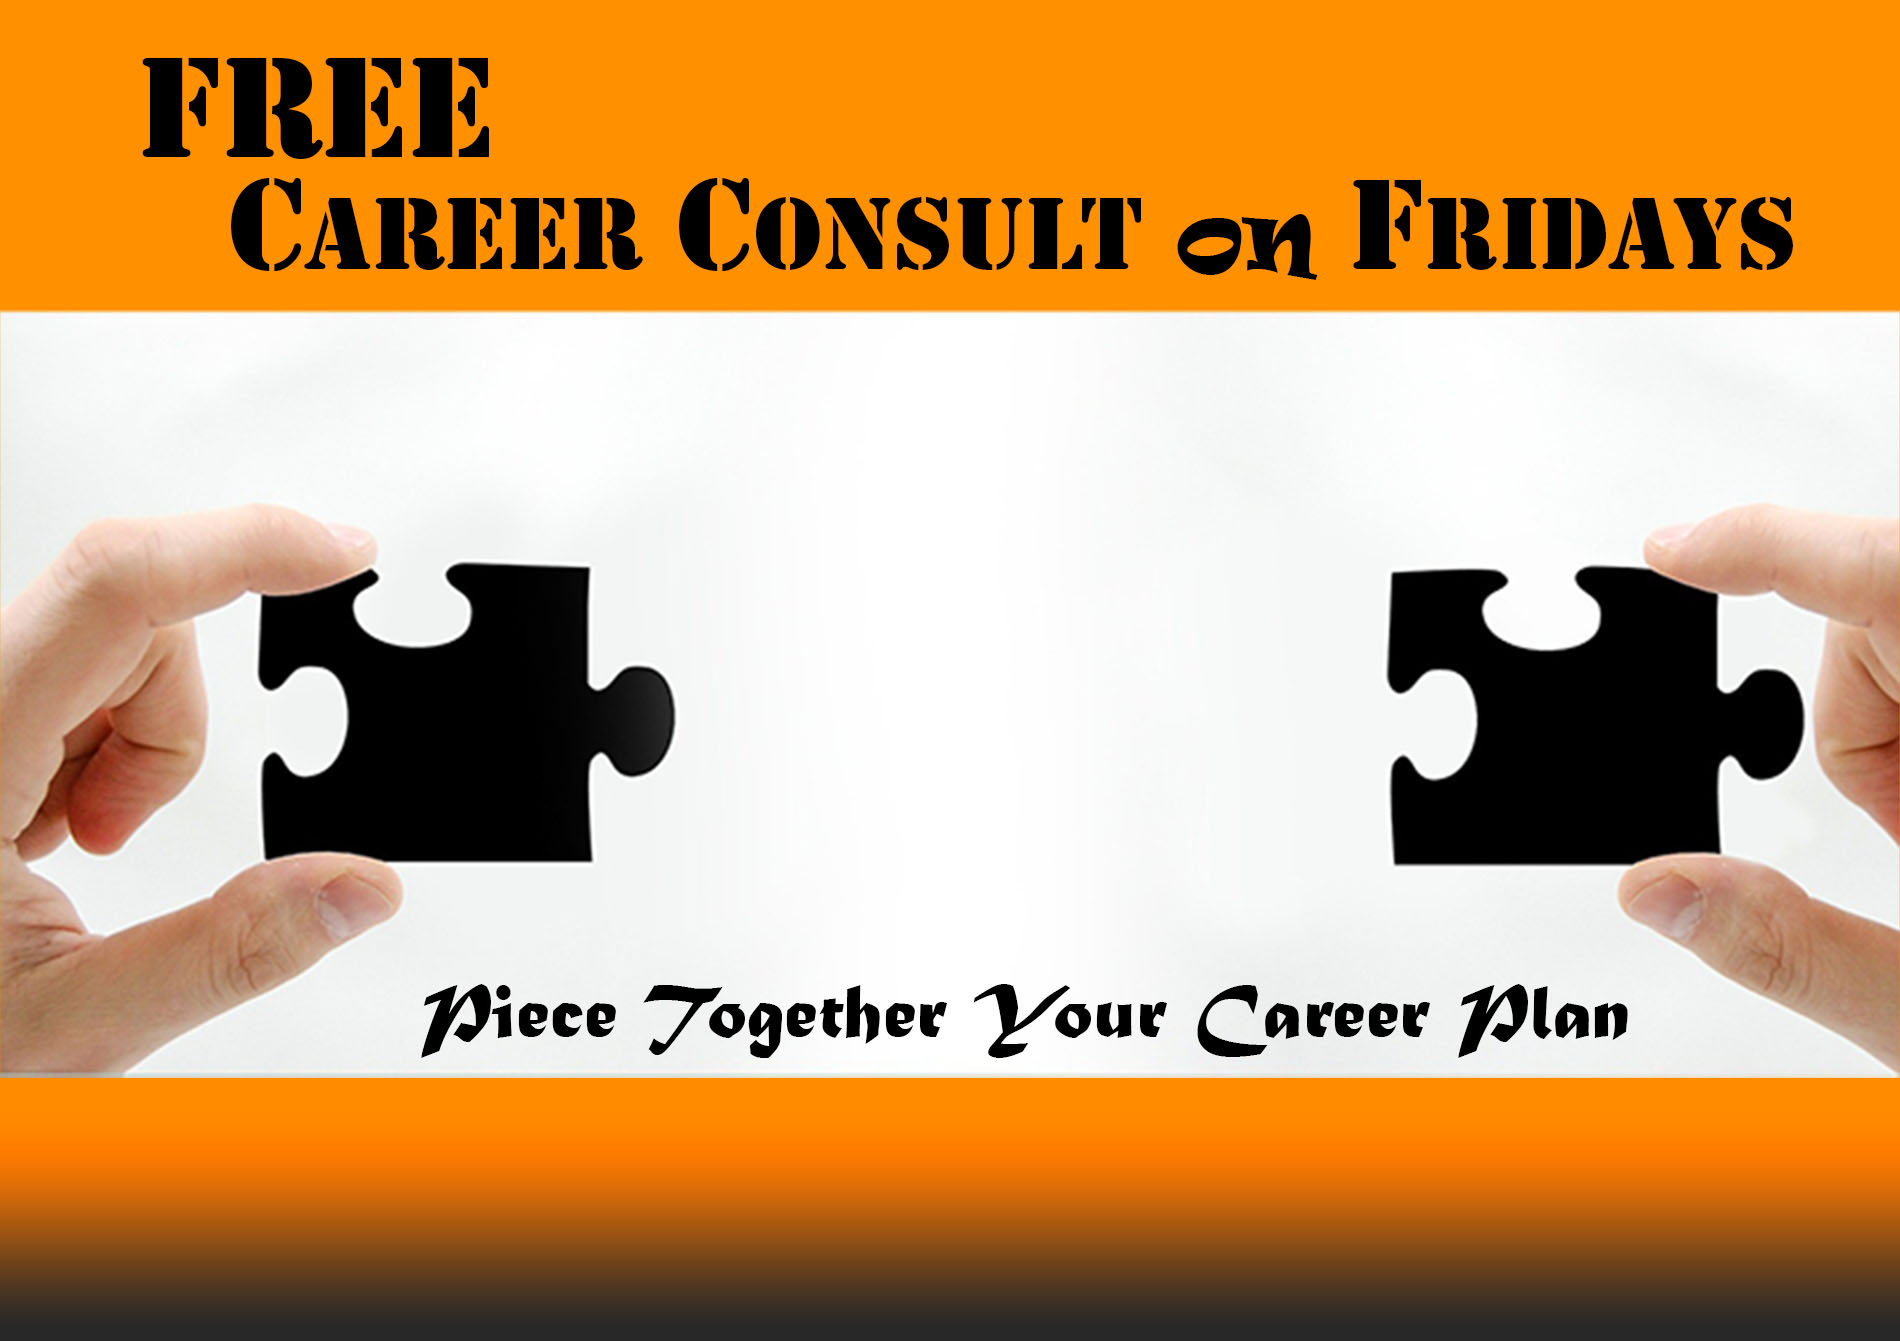 Career Consult for Free Career Advice